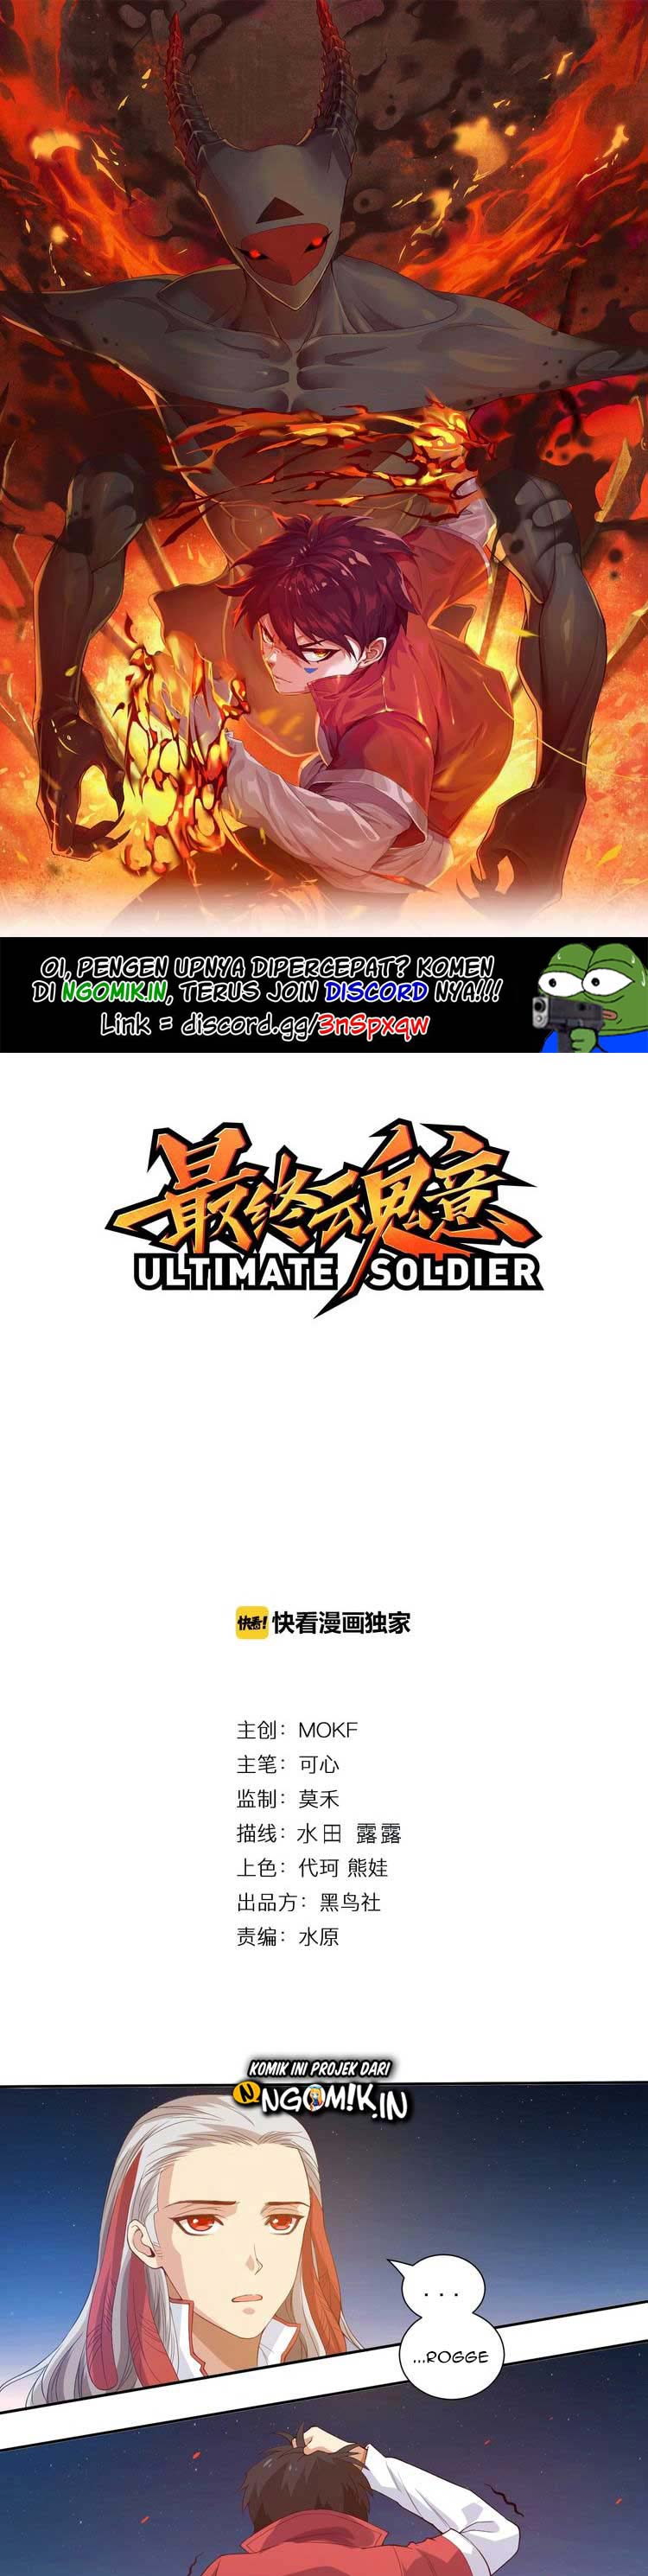 Ultimate Soldier Chapter 21